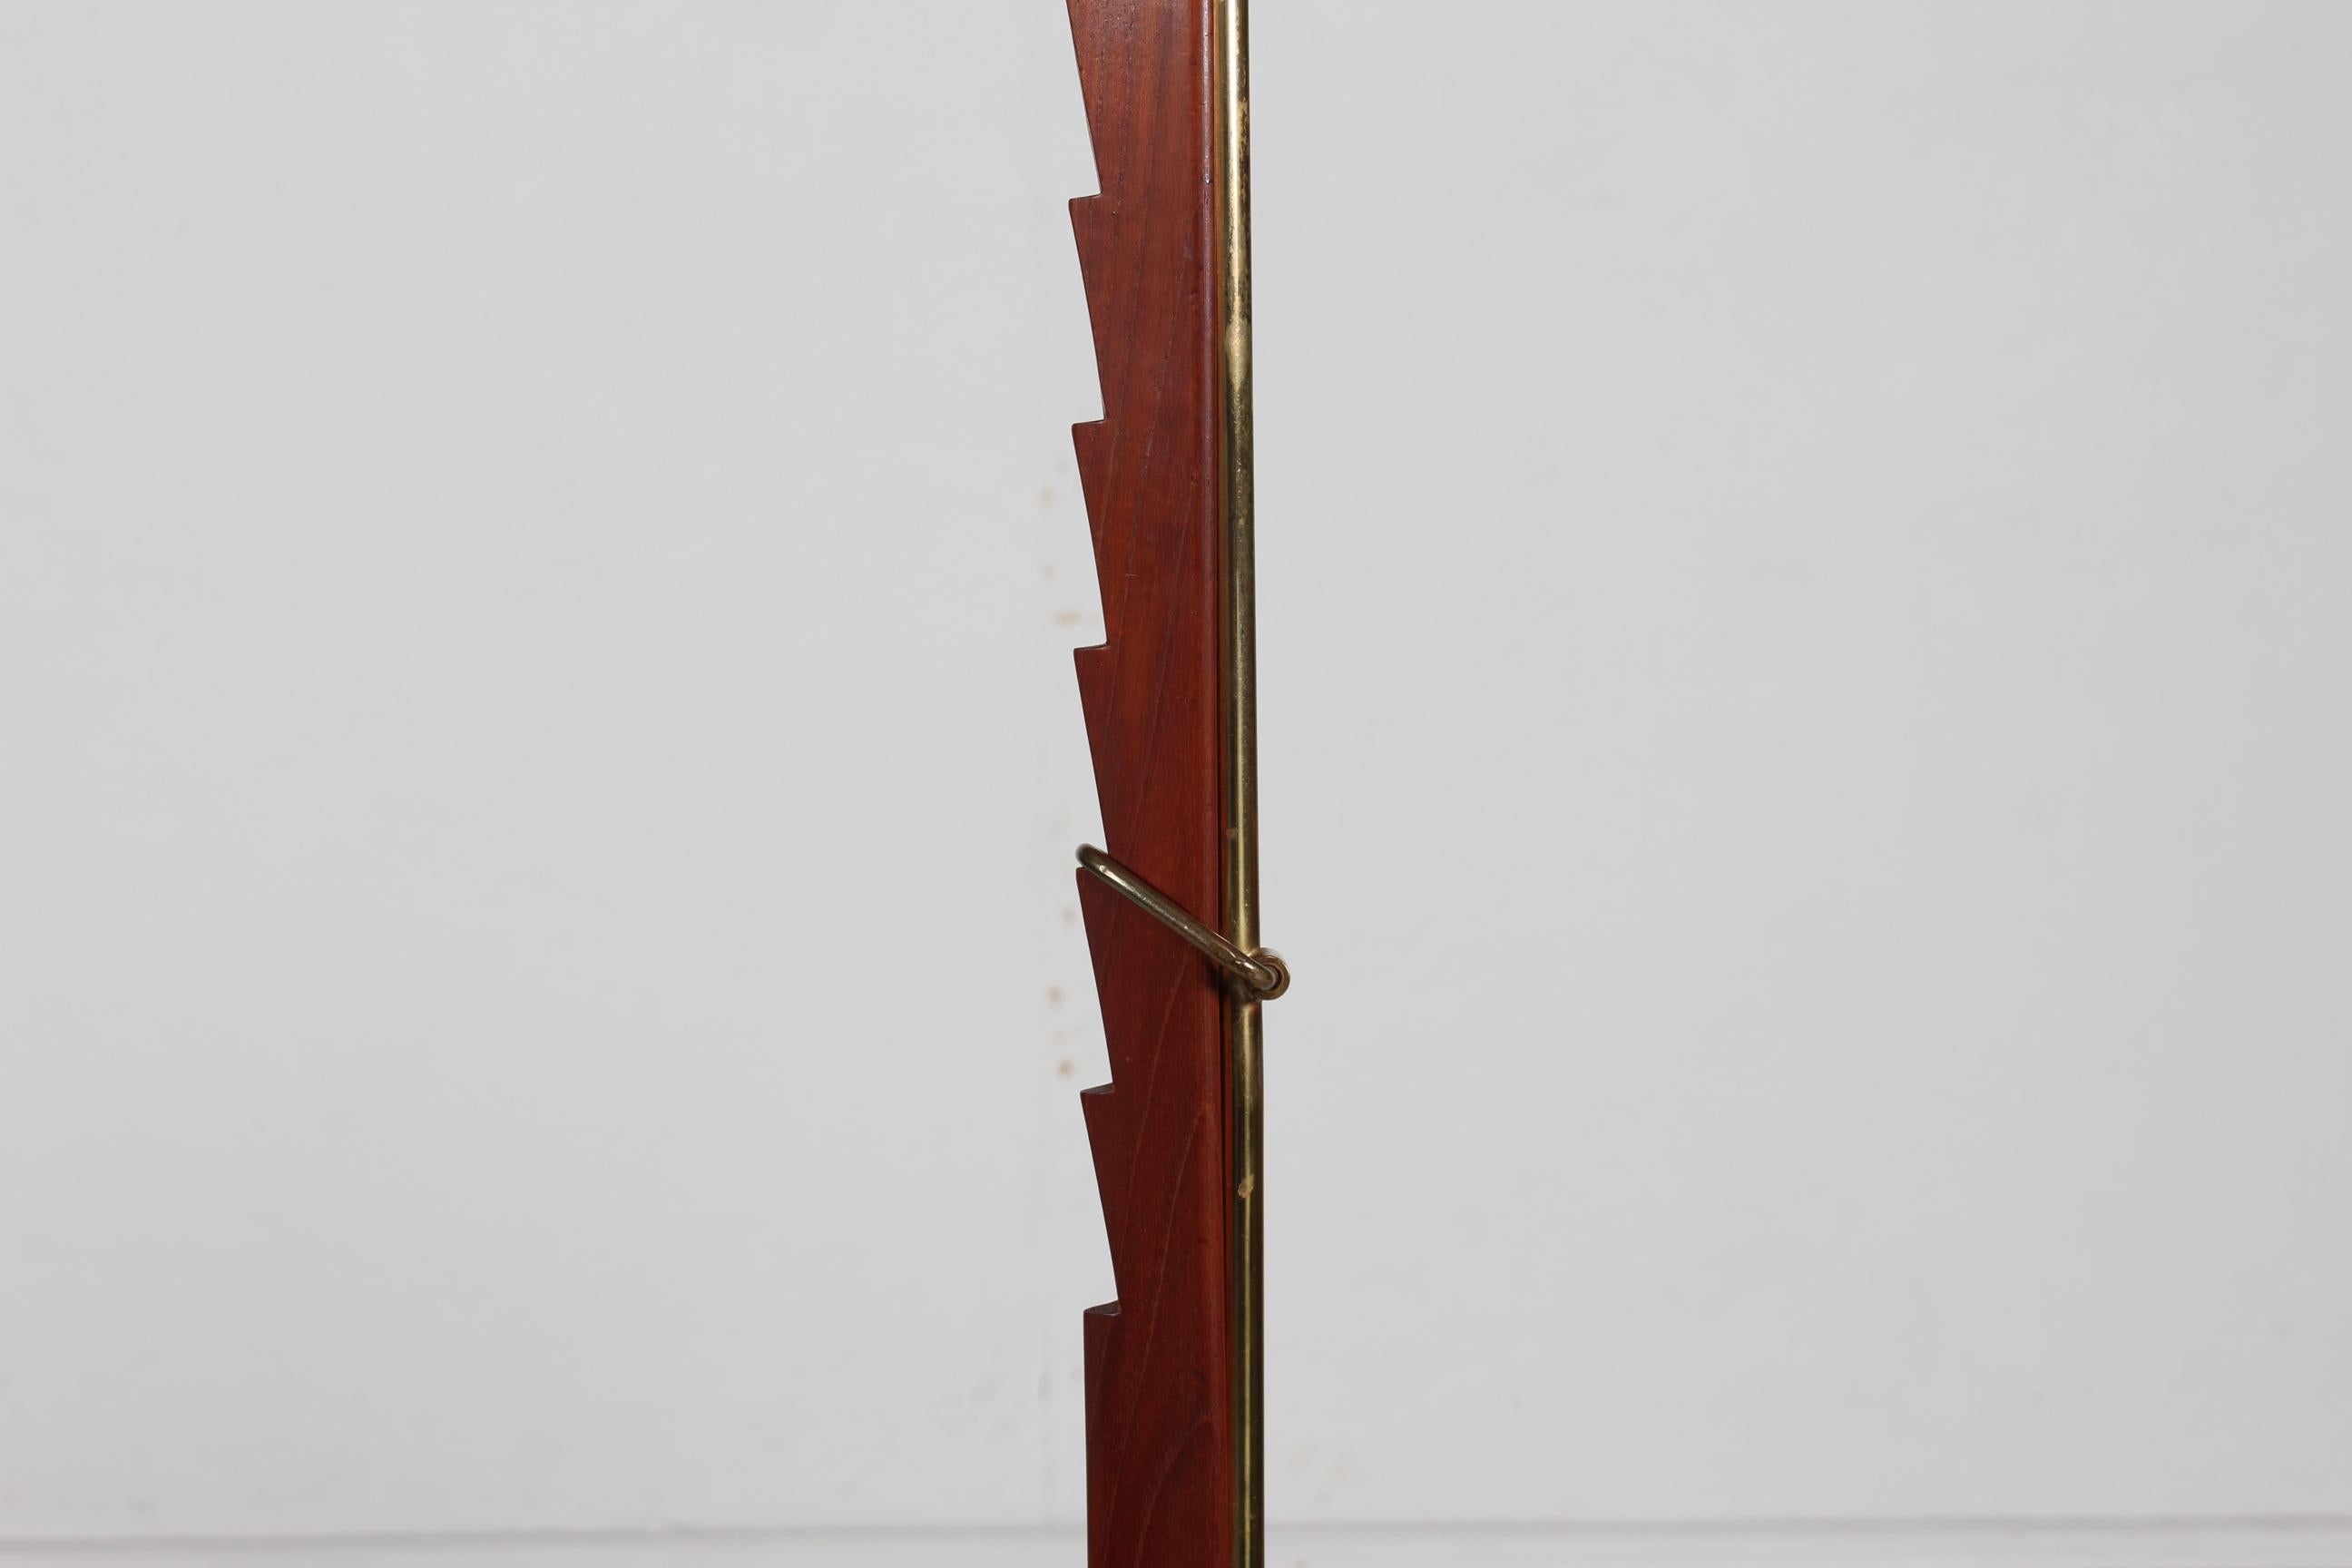 Height adjustable floor lamp by Danish designer Svend Aage Holm Sørensen (1913-2004) made at his own workshop Holm Sørensen & Co.

The lamp base is made of cast iron, the stem is made of teak and brass.
 The lamp shade is a original Le Klint shade